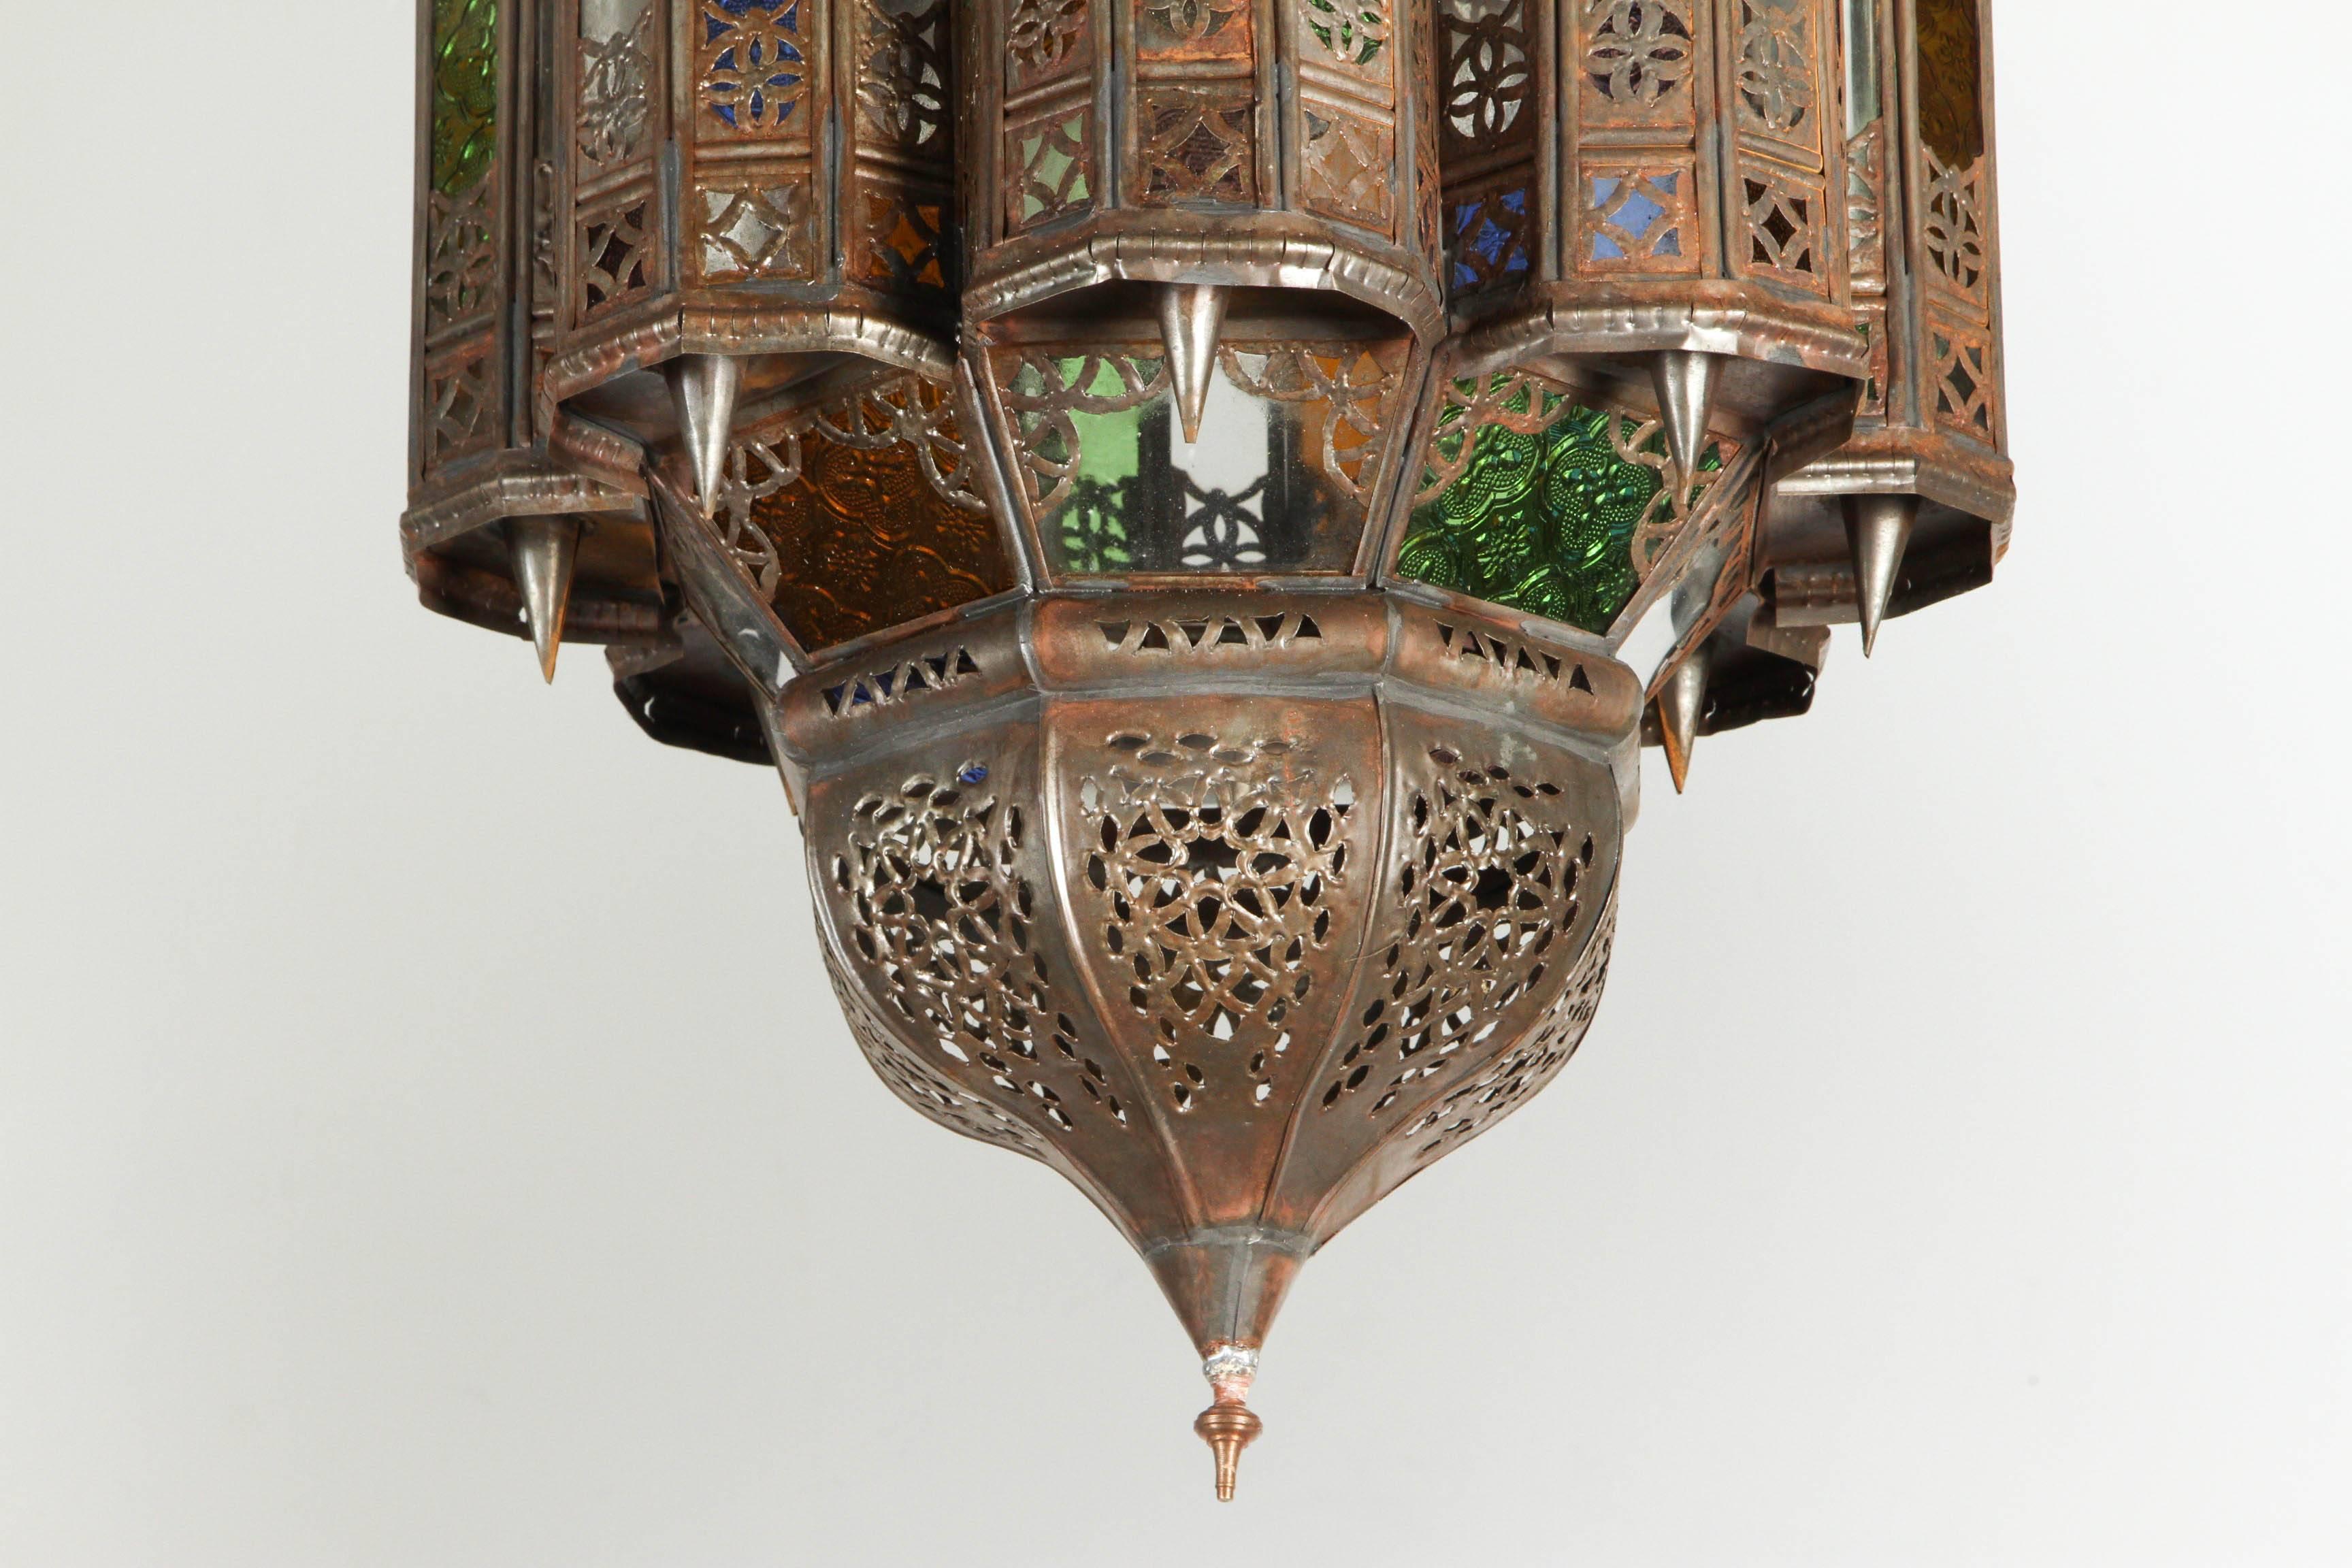 Large Moroccan Mamounia style pendant lantern.
Multicolor glass, blue, green, amber, lavender and clear, multifaceted and intricate filigree Moorish work on metal, bronze patina rust finish.
Brass final.
Handcrafted in Morocco by skilled